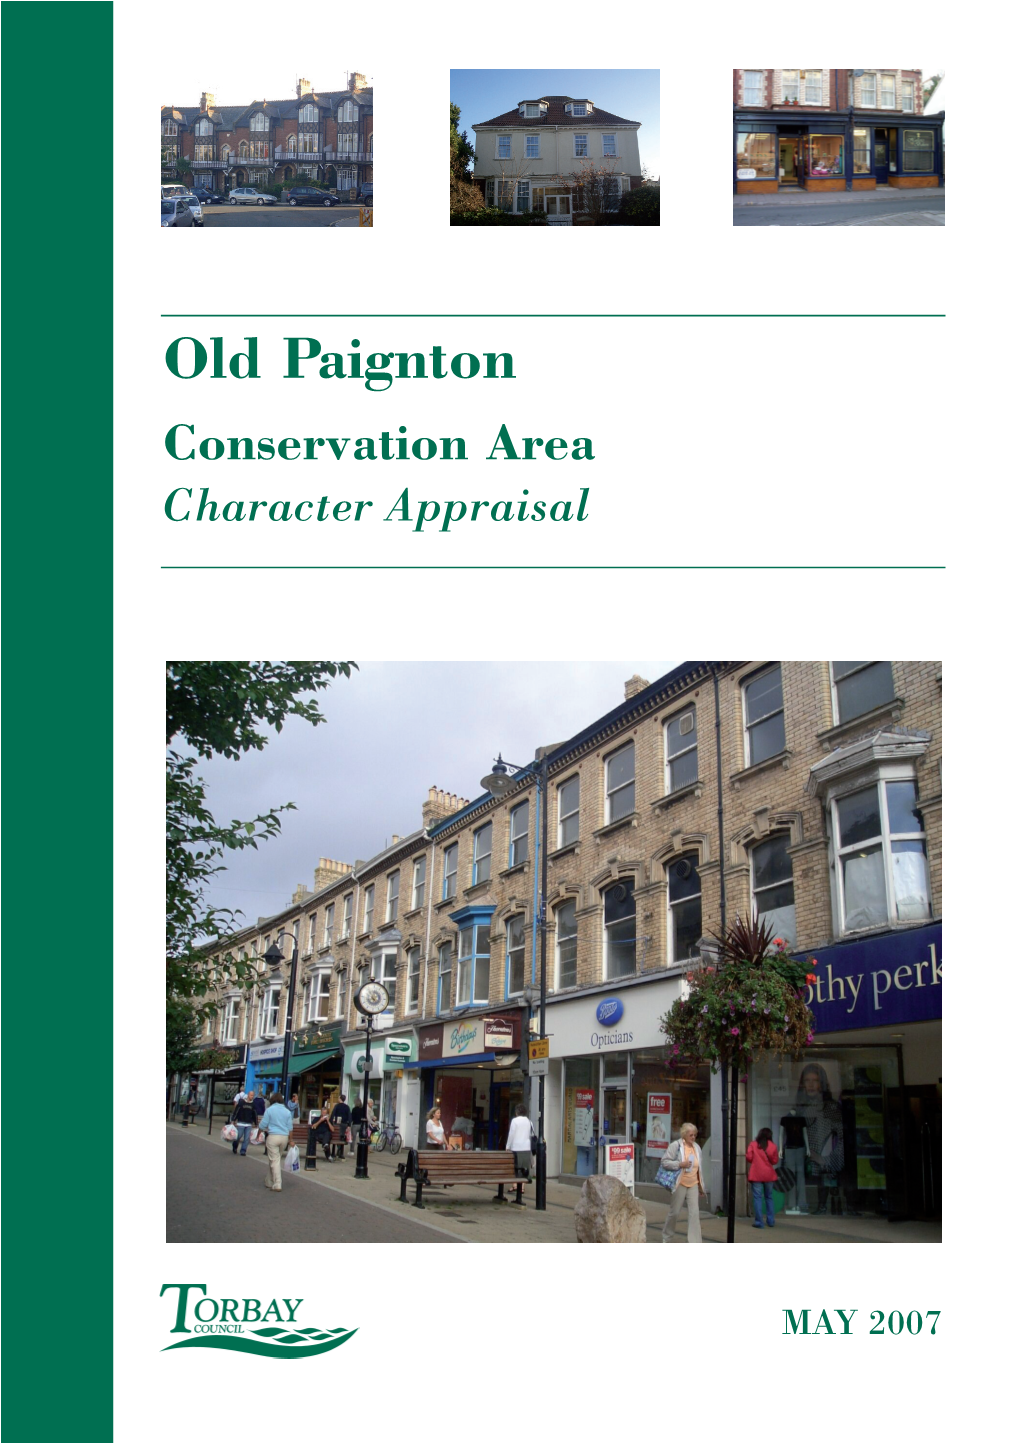 Old Paignton Conservation Area Character Appraisal